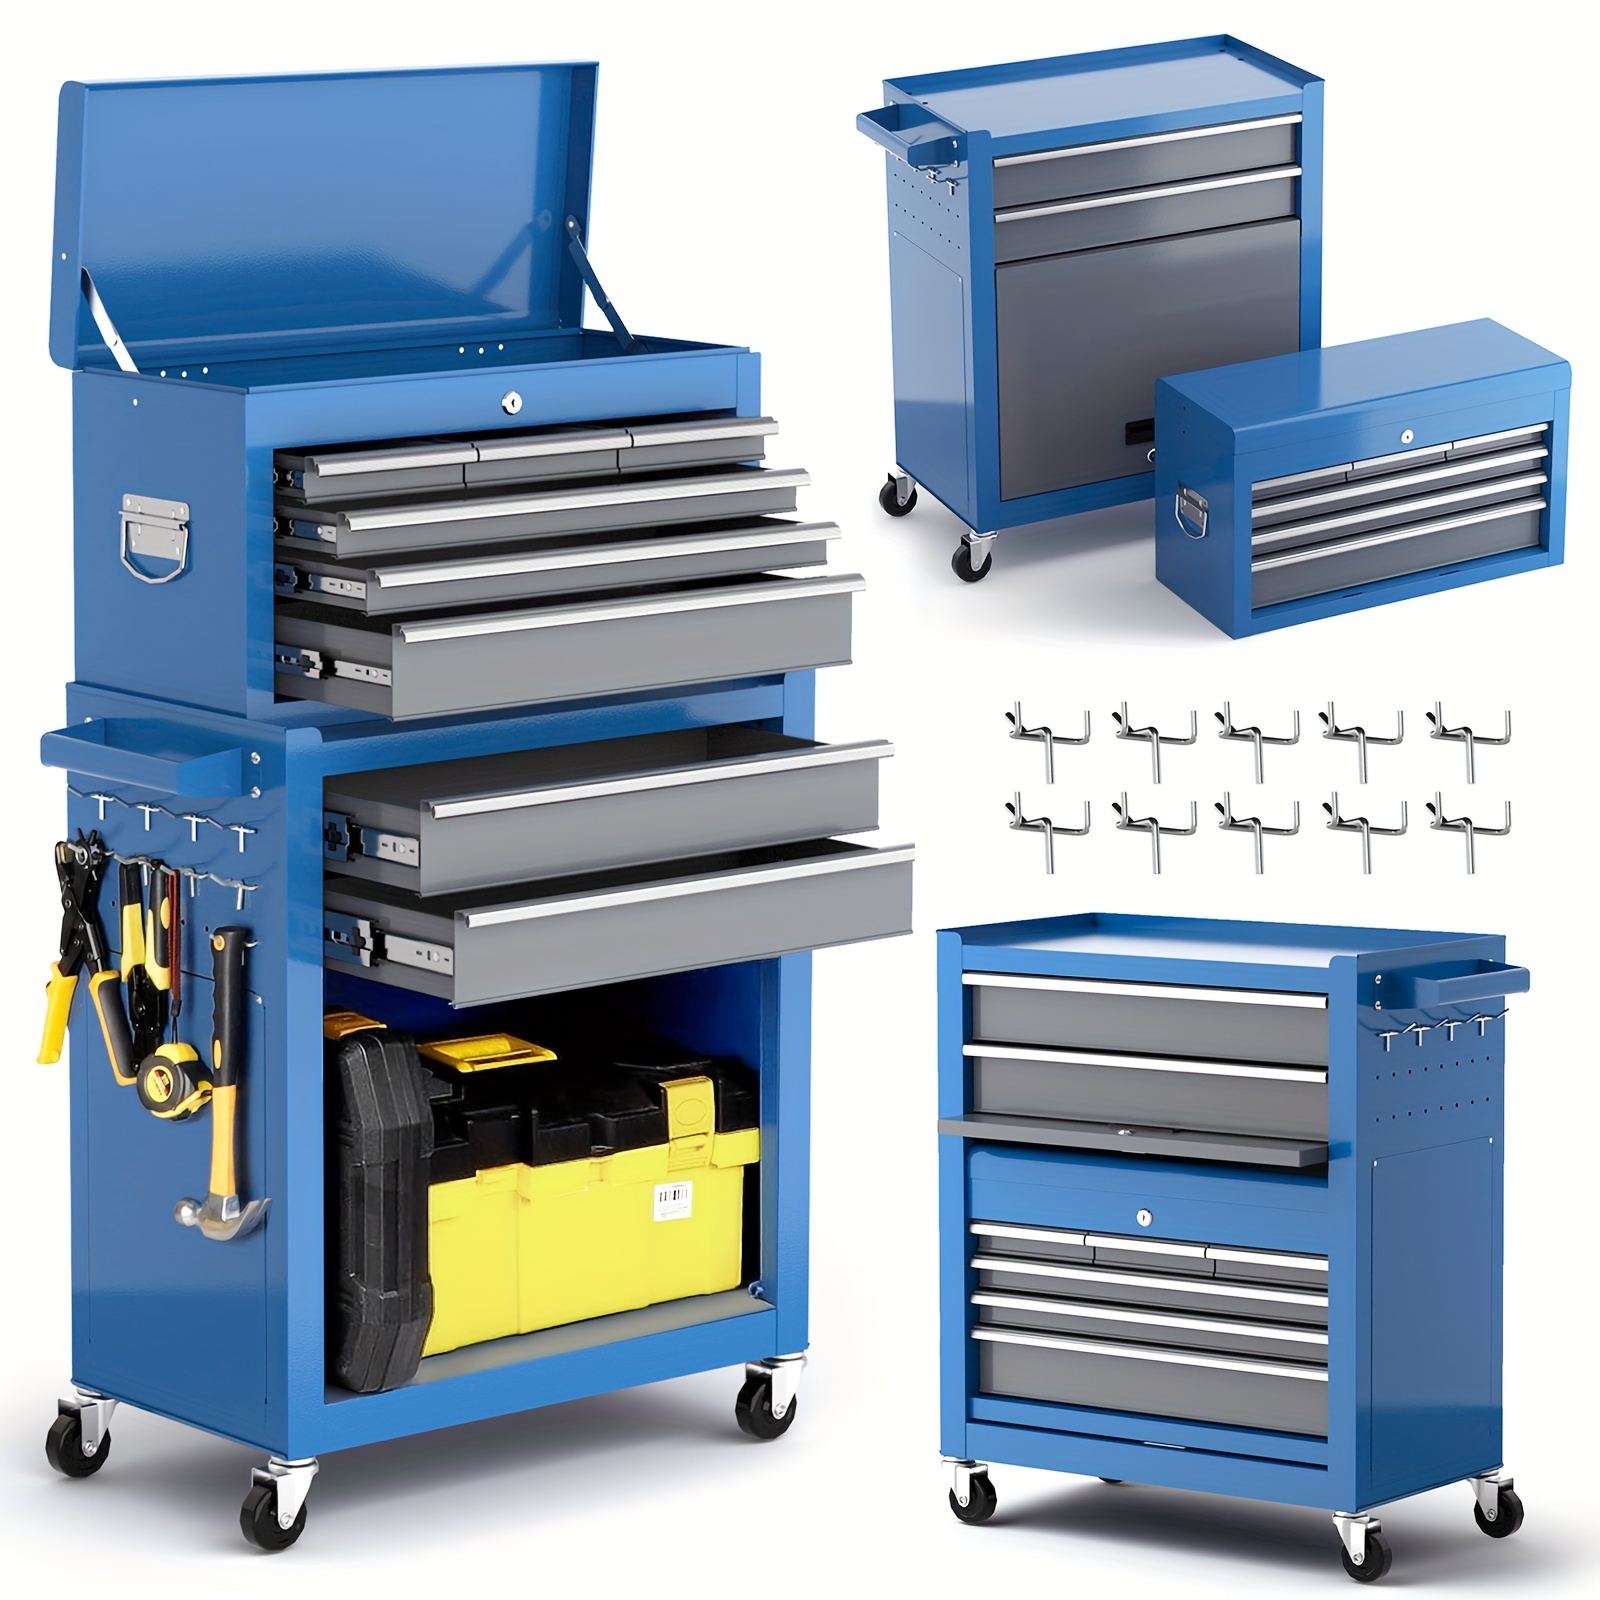 45pcs Tool Box Organizer: Maximize Your Tool Chest Storage with Drawer  Dividers & Trays!